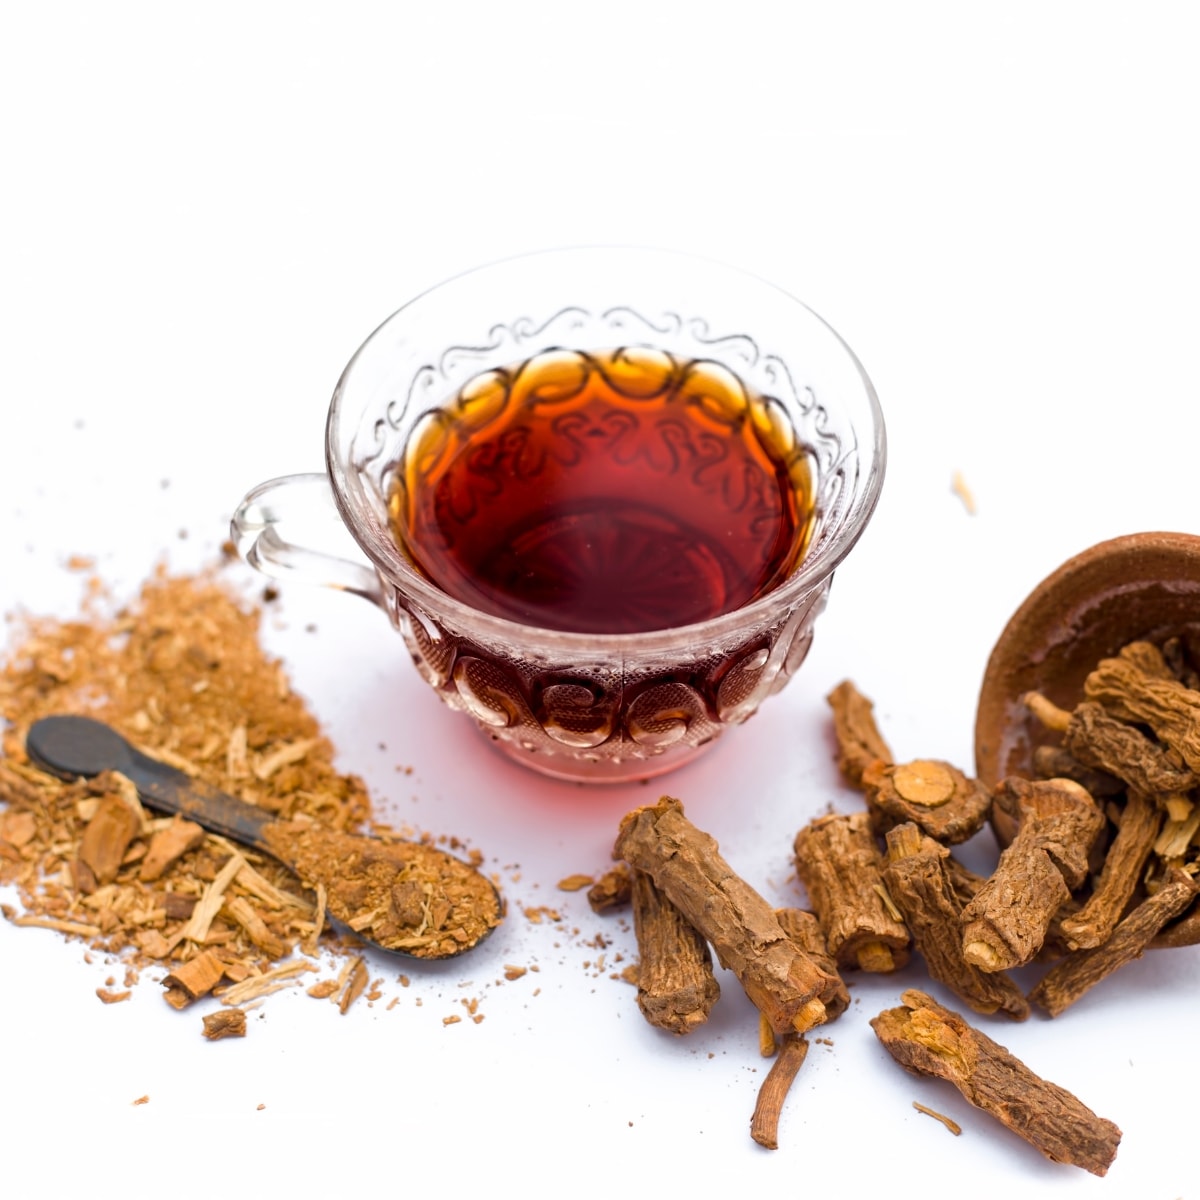 Dried Sarsaparilla with its Syrup and Powder on a White Background